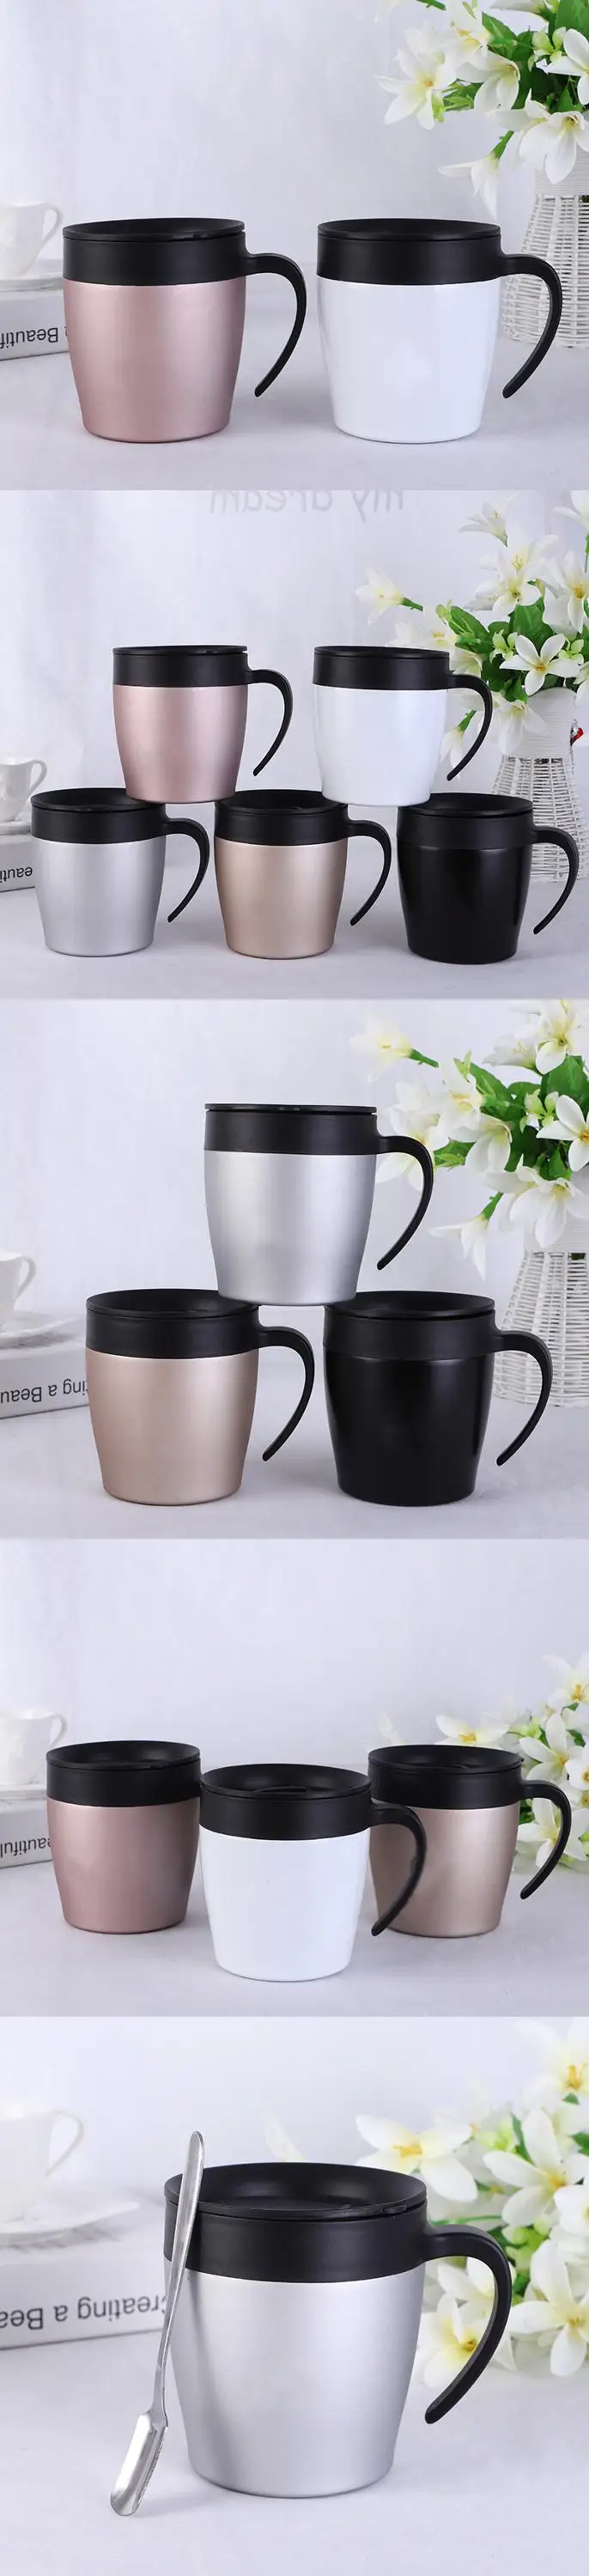 Stainless Steel Coffee Mug With Spill Resistant Lid Double Wall Beer